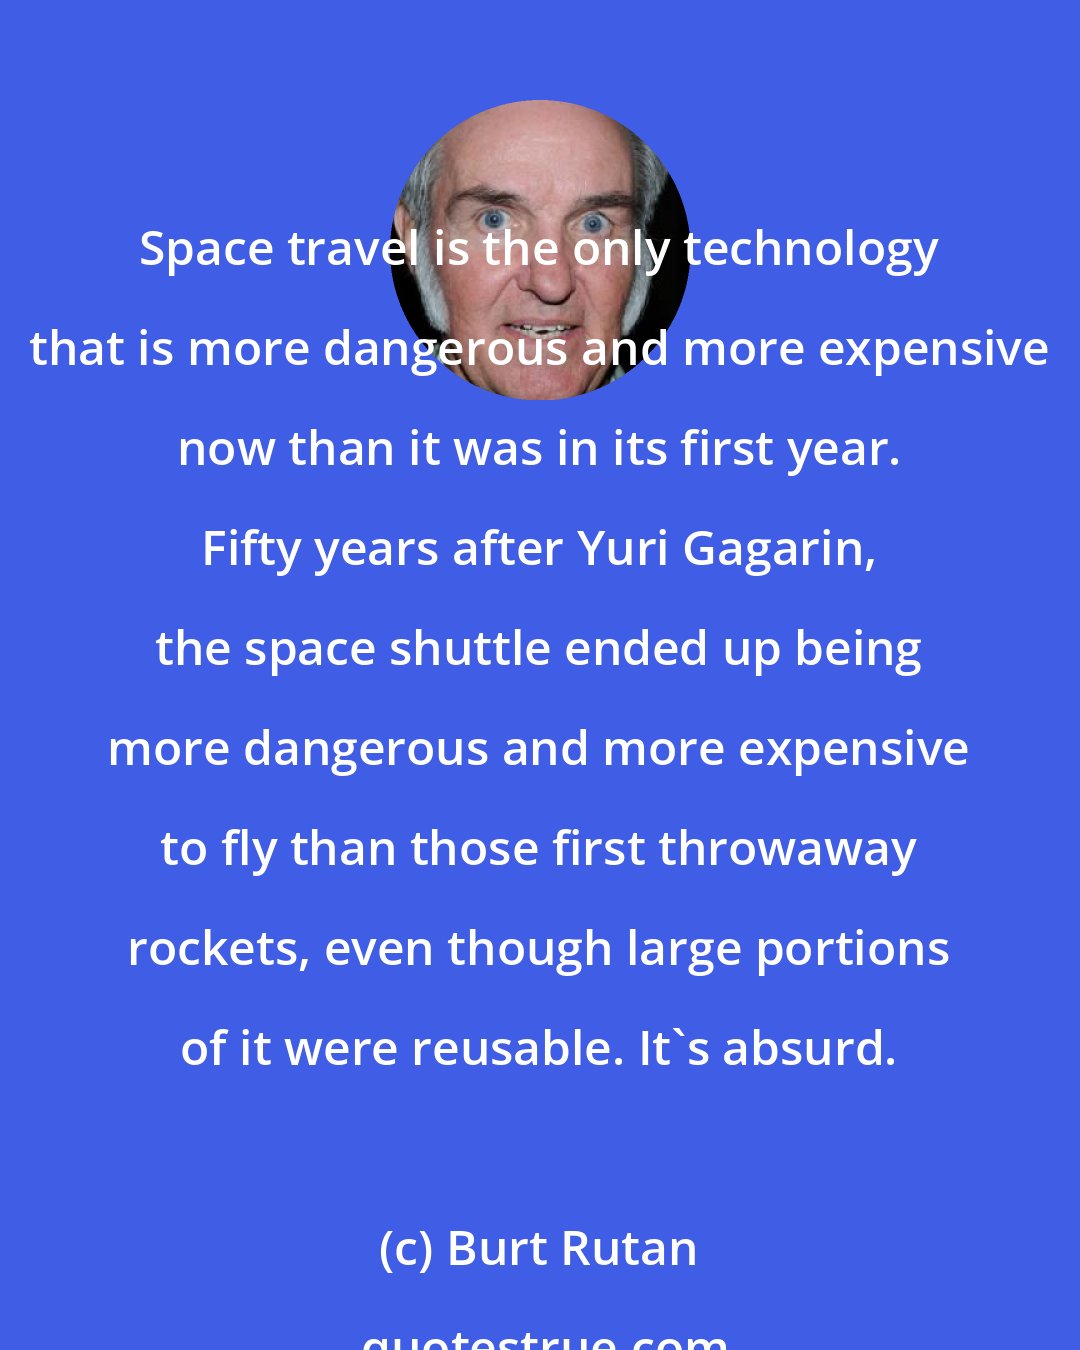 Burt Rutan: Space travel is the only technology that is more dangerous and more expensive now than it was in its first year. Fifty years after Yuri Gagarin, the space shuttle ended up being more dangerous and more expensive to fly than those first throwaway rockets, even though large portions of it were reusable. It's absurd.